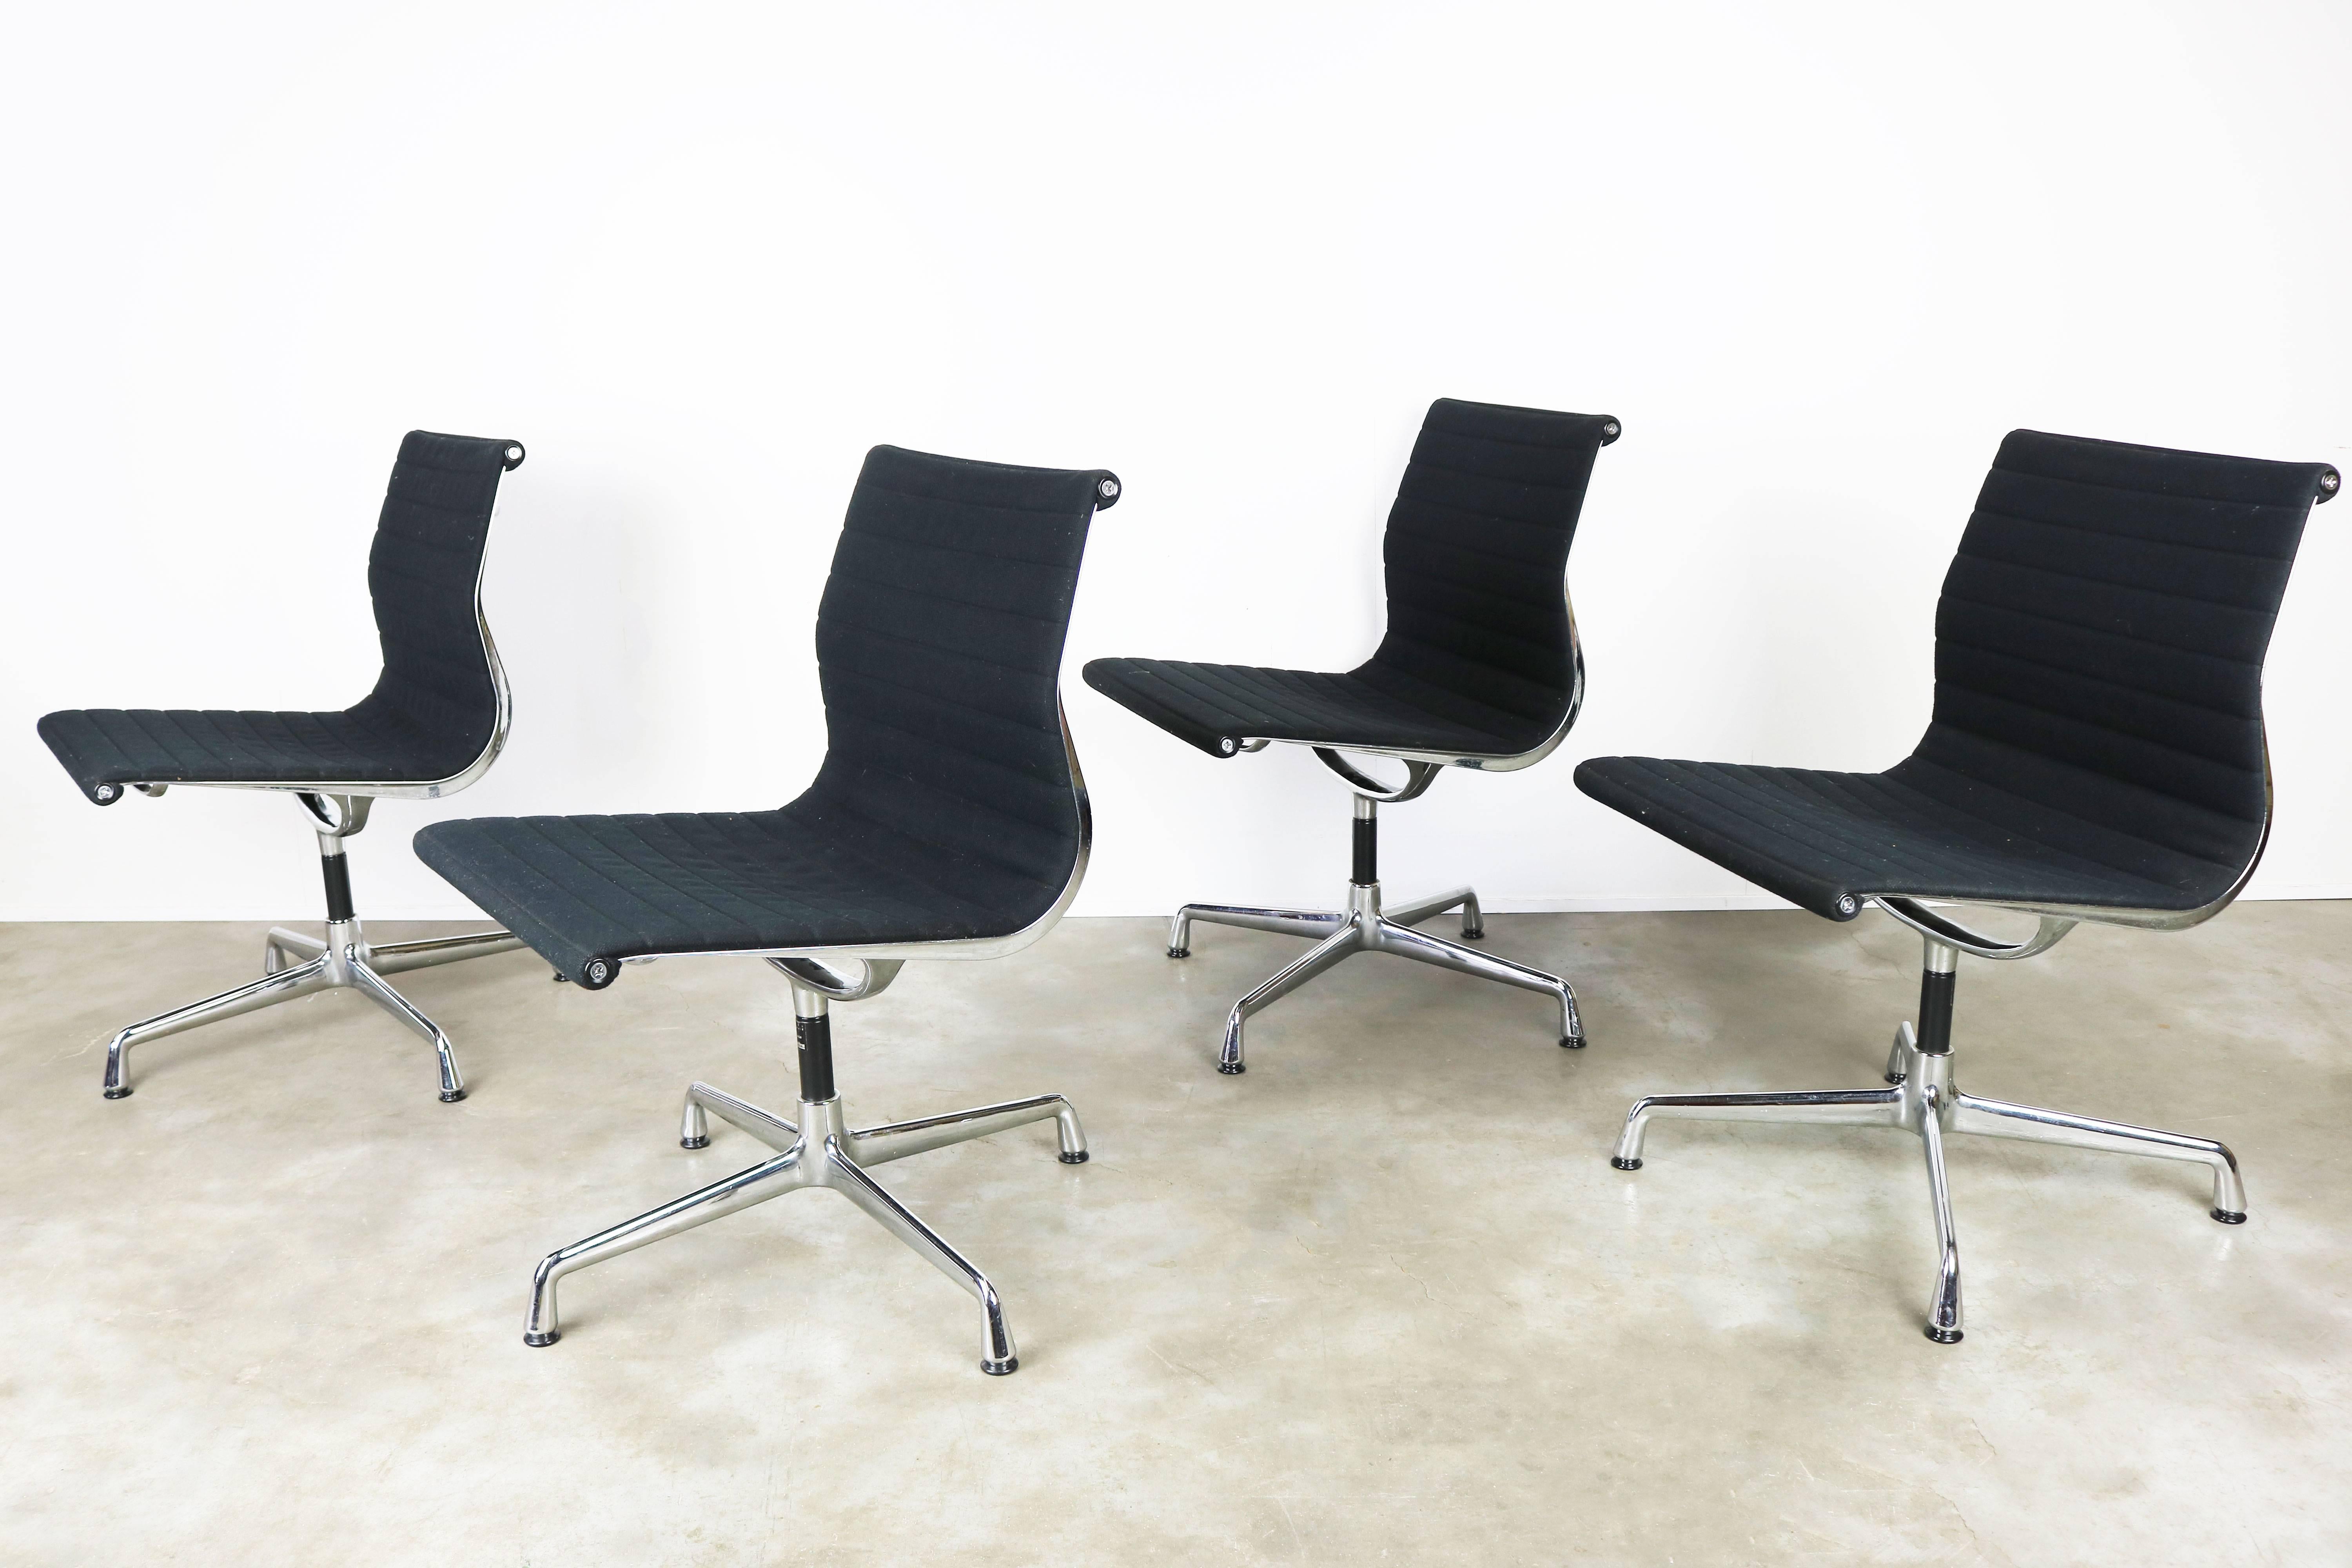 A set of four wonderful and famous vintage model: EA 106 swivel office chairs by Charles & Ray Eames produced by Vitra / Herman Miller in the early 1980s. The chairs have always been a statement of class and comfort , this set reflects that